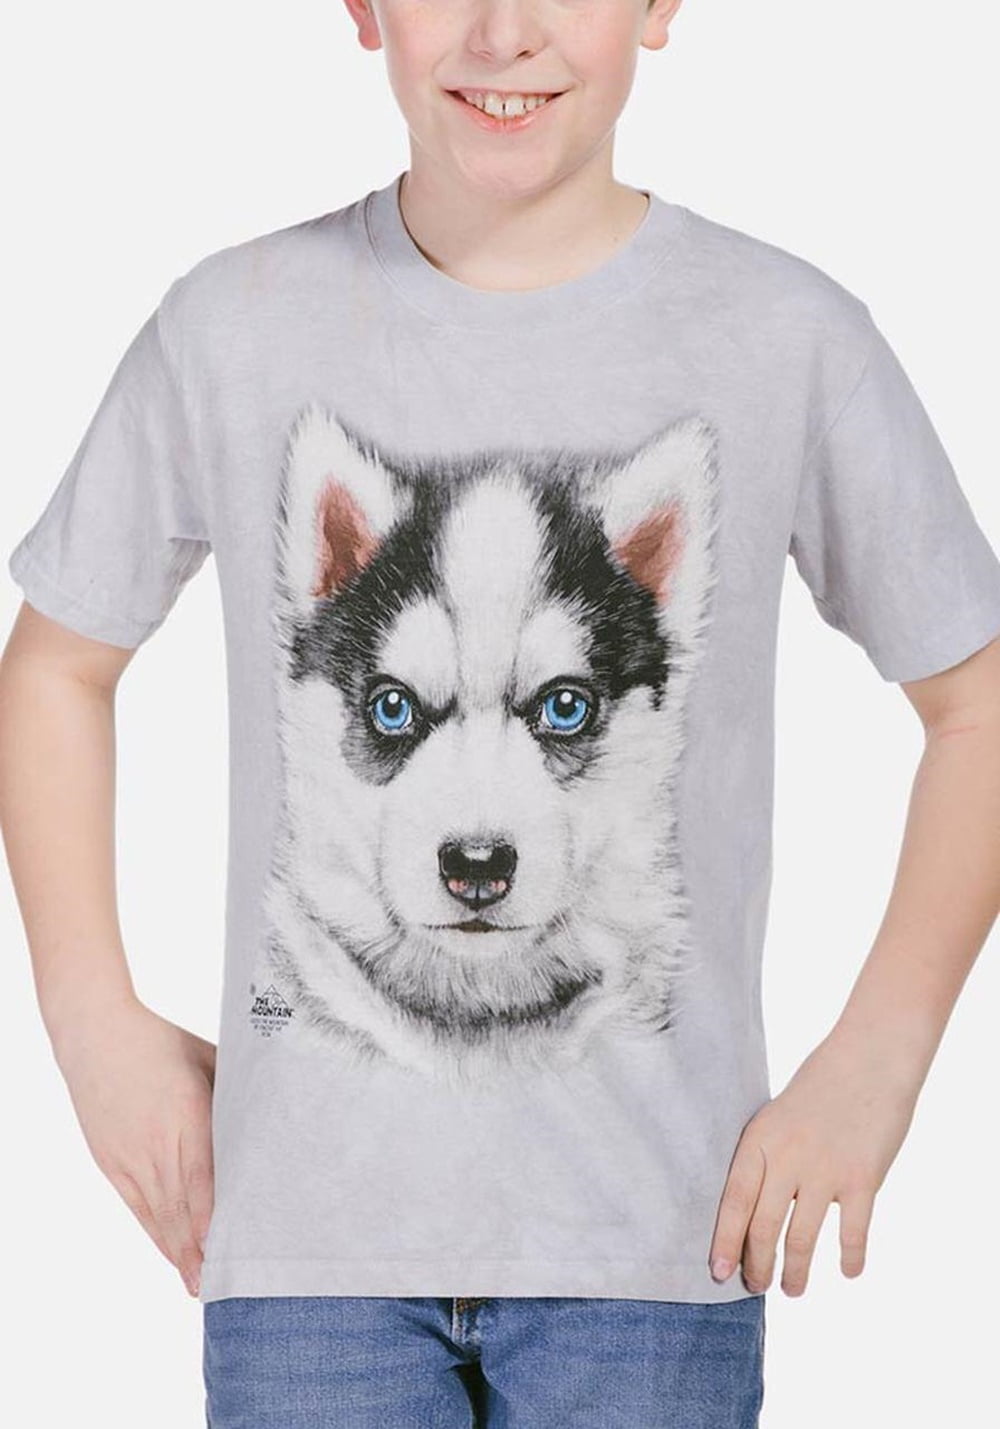 Kids Graphic Tee Youth T Shirt Siberian Husky Clothes for Girls